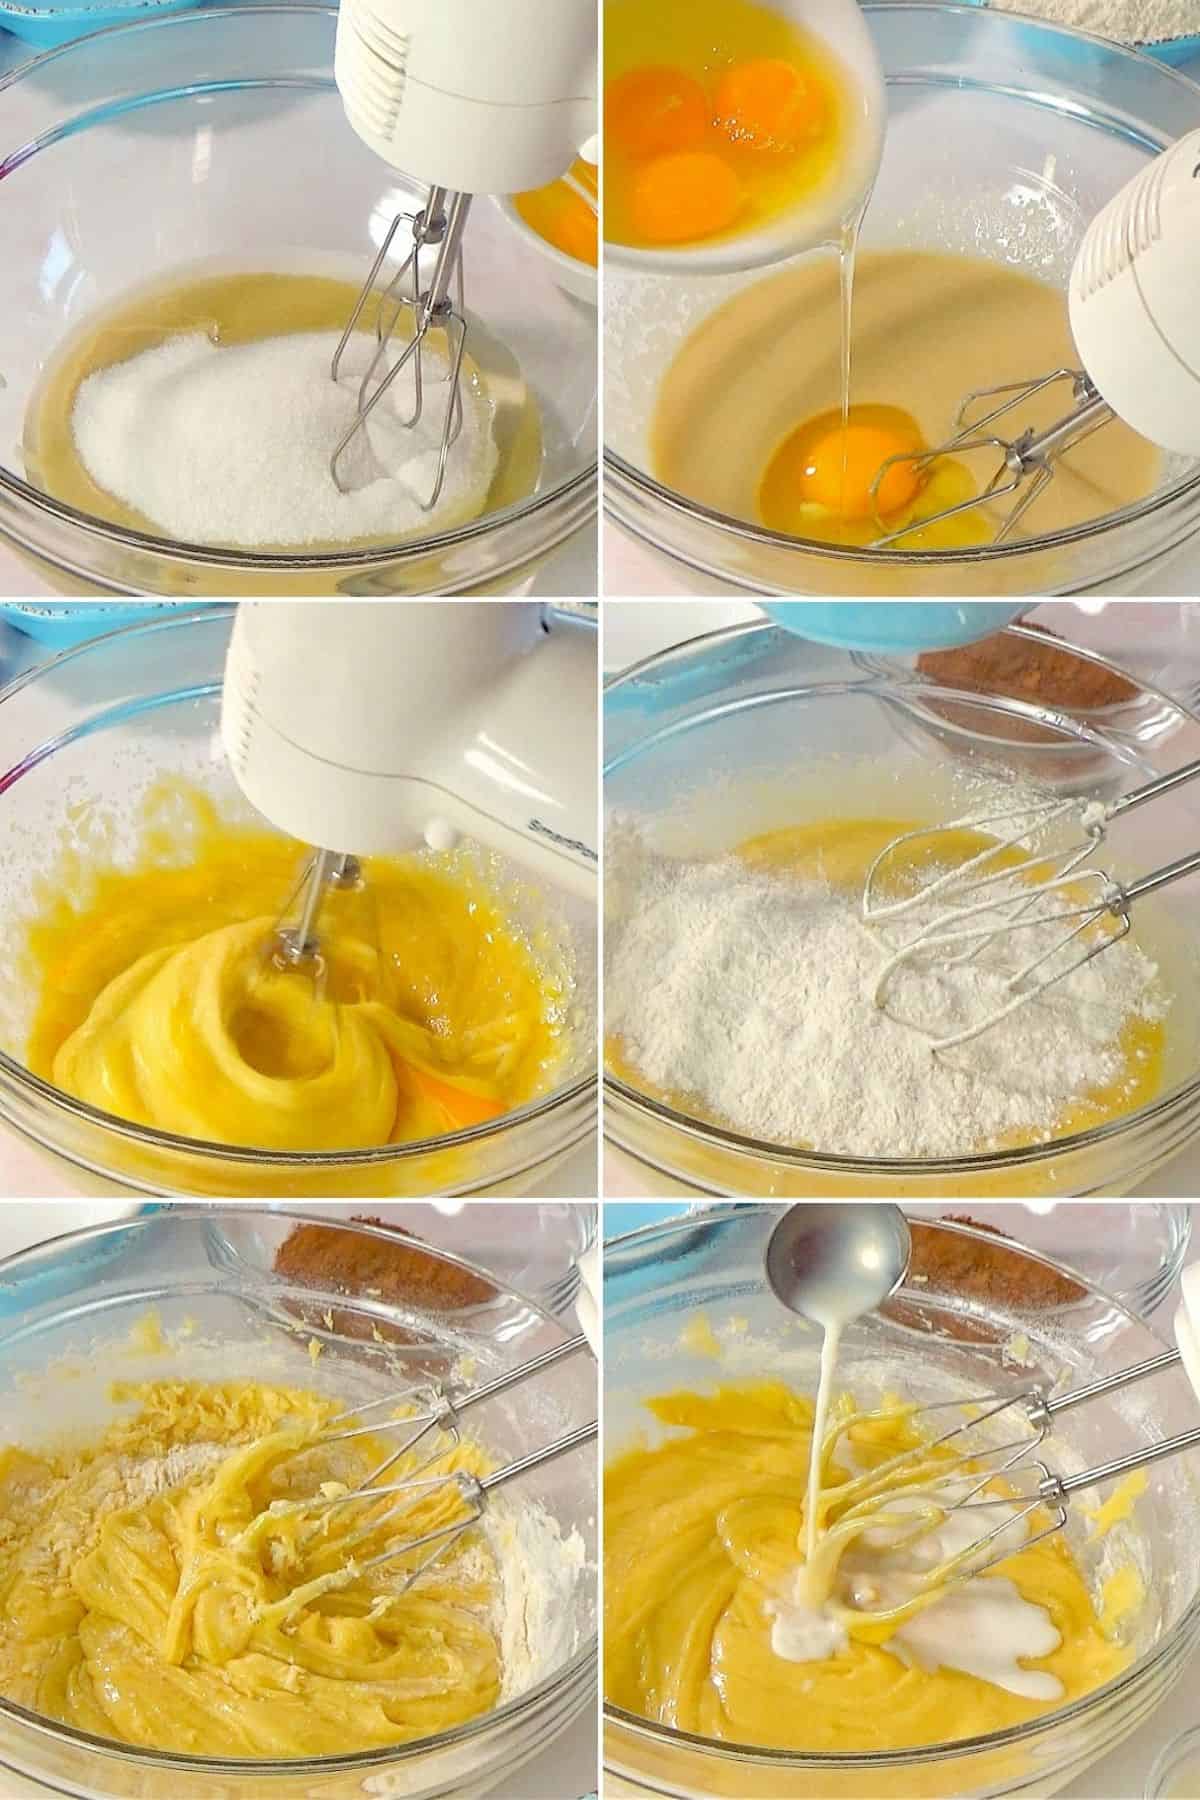 Step by step process of making plain cake batter.